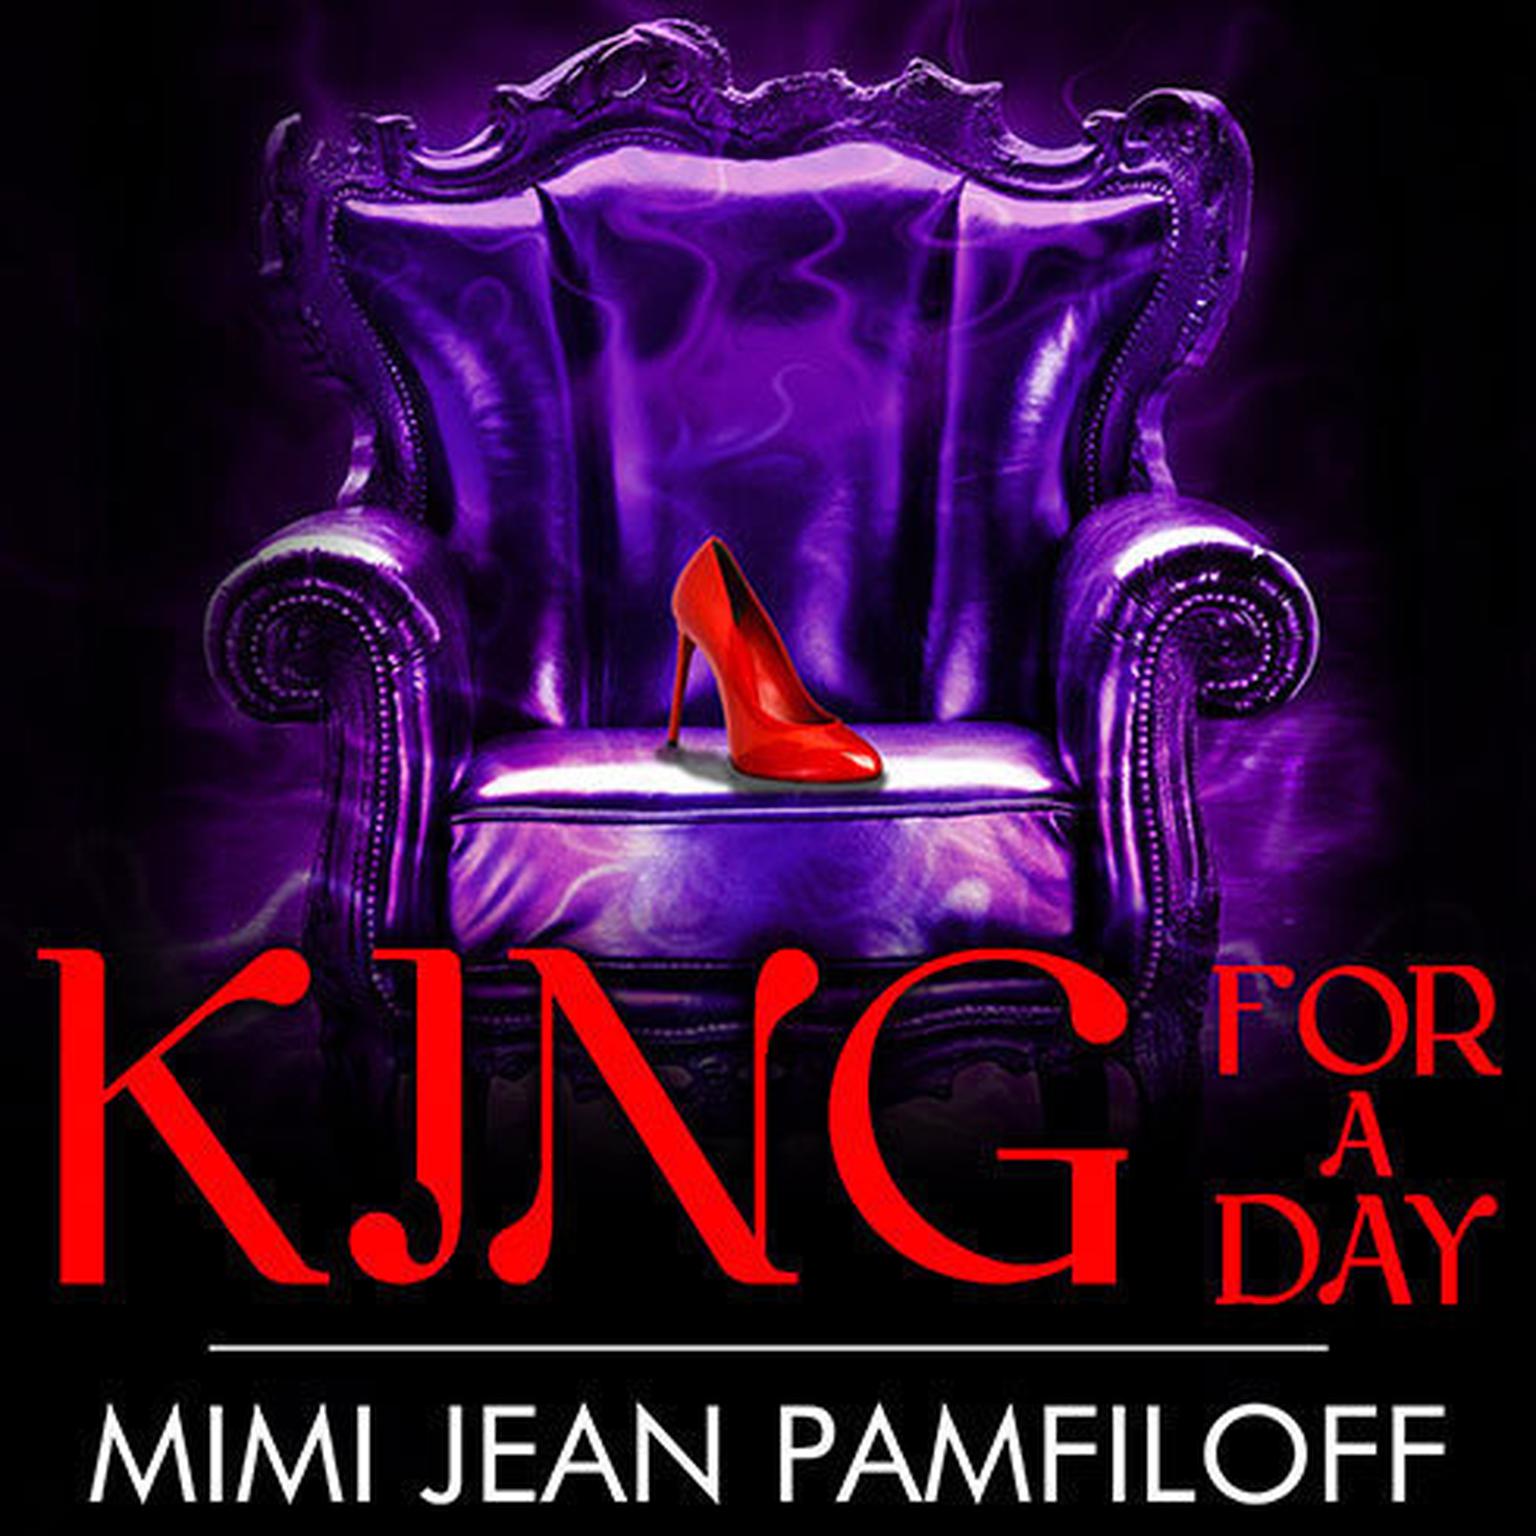 King for a Day Audiobook, by Mimi Jean Pamfiloff